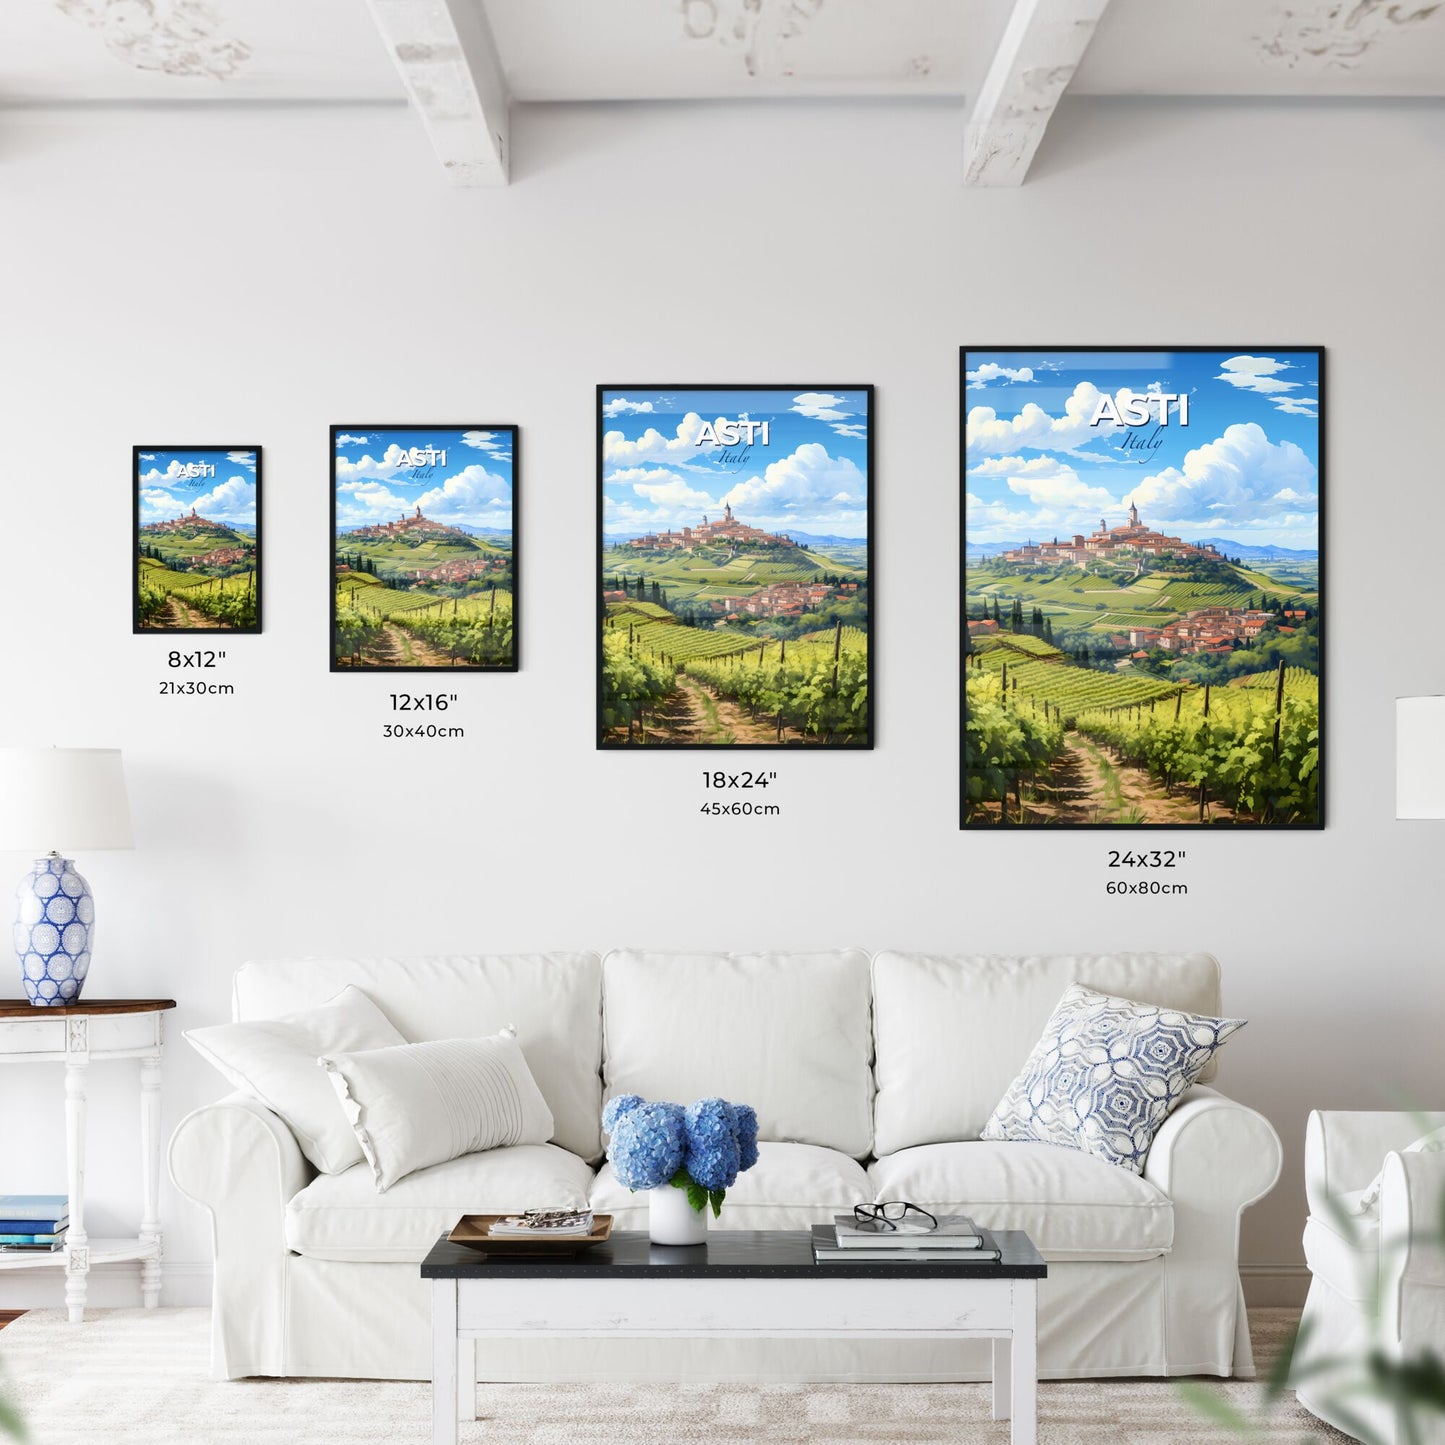 Asti, Italy, A Poster of a landscape of a town on a hill with a vineyard Default Title